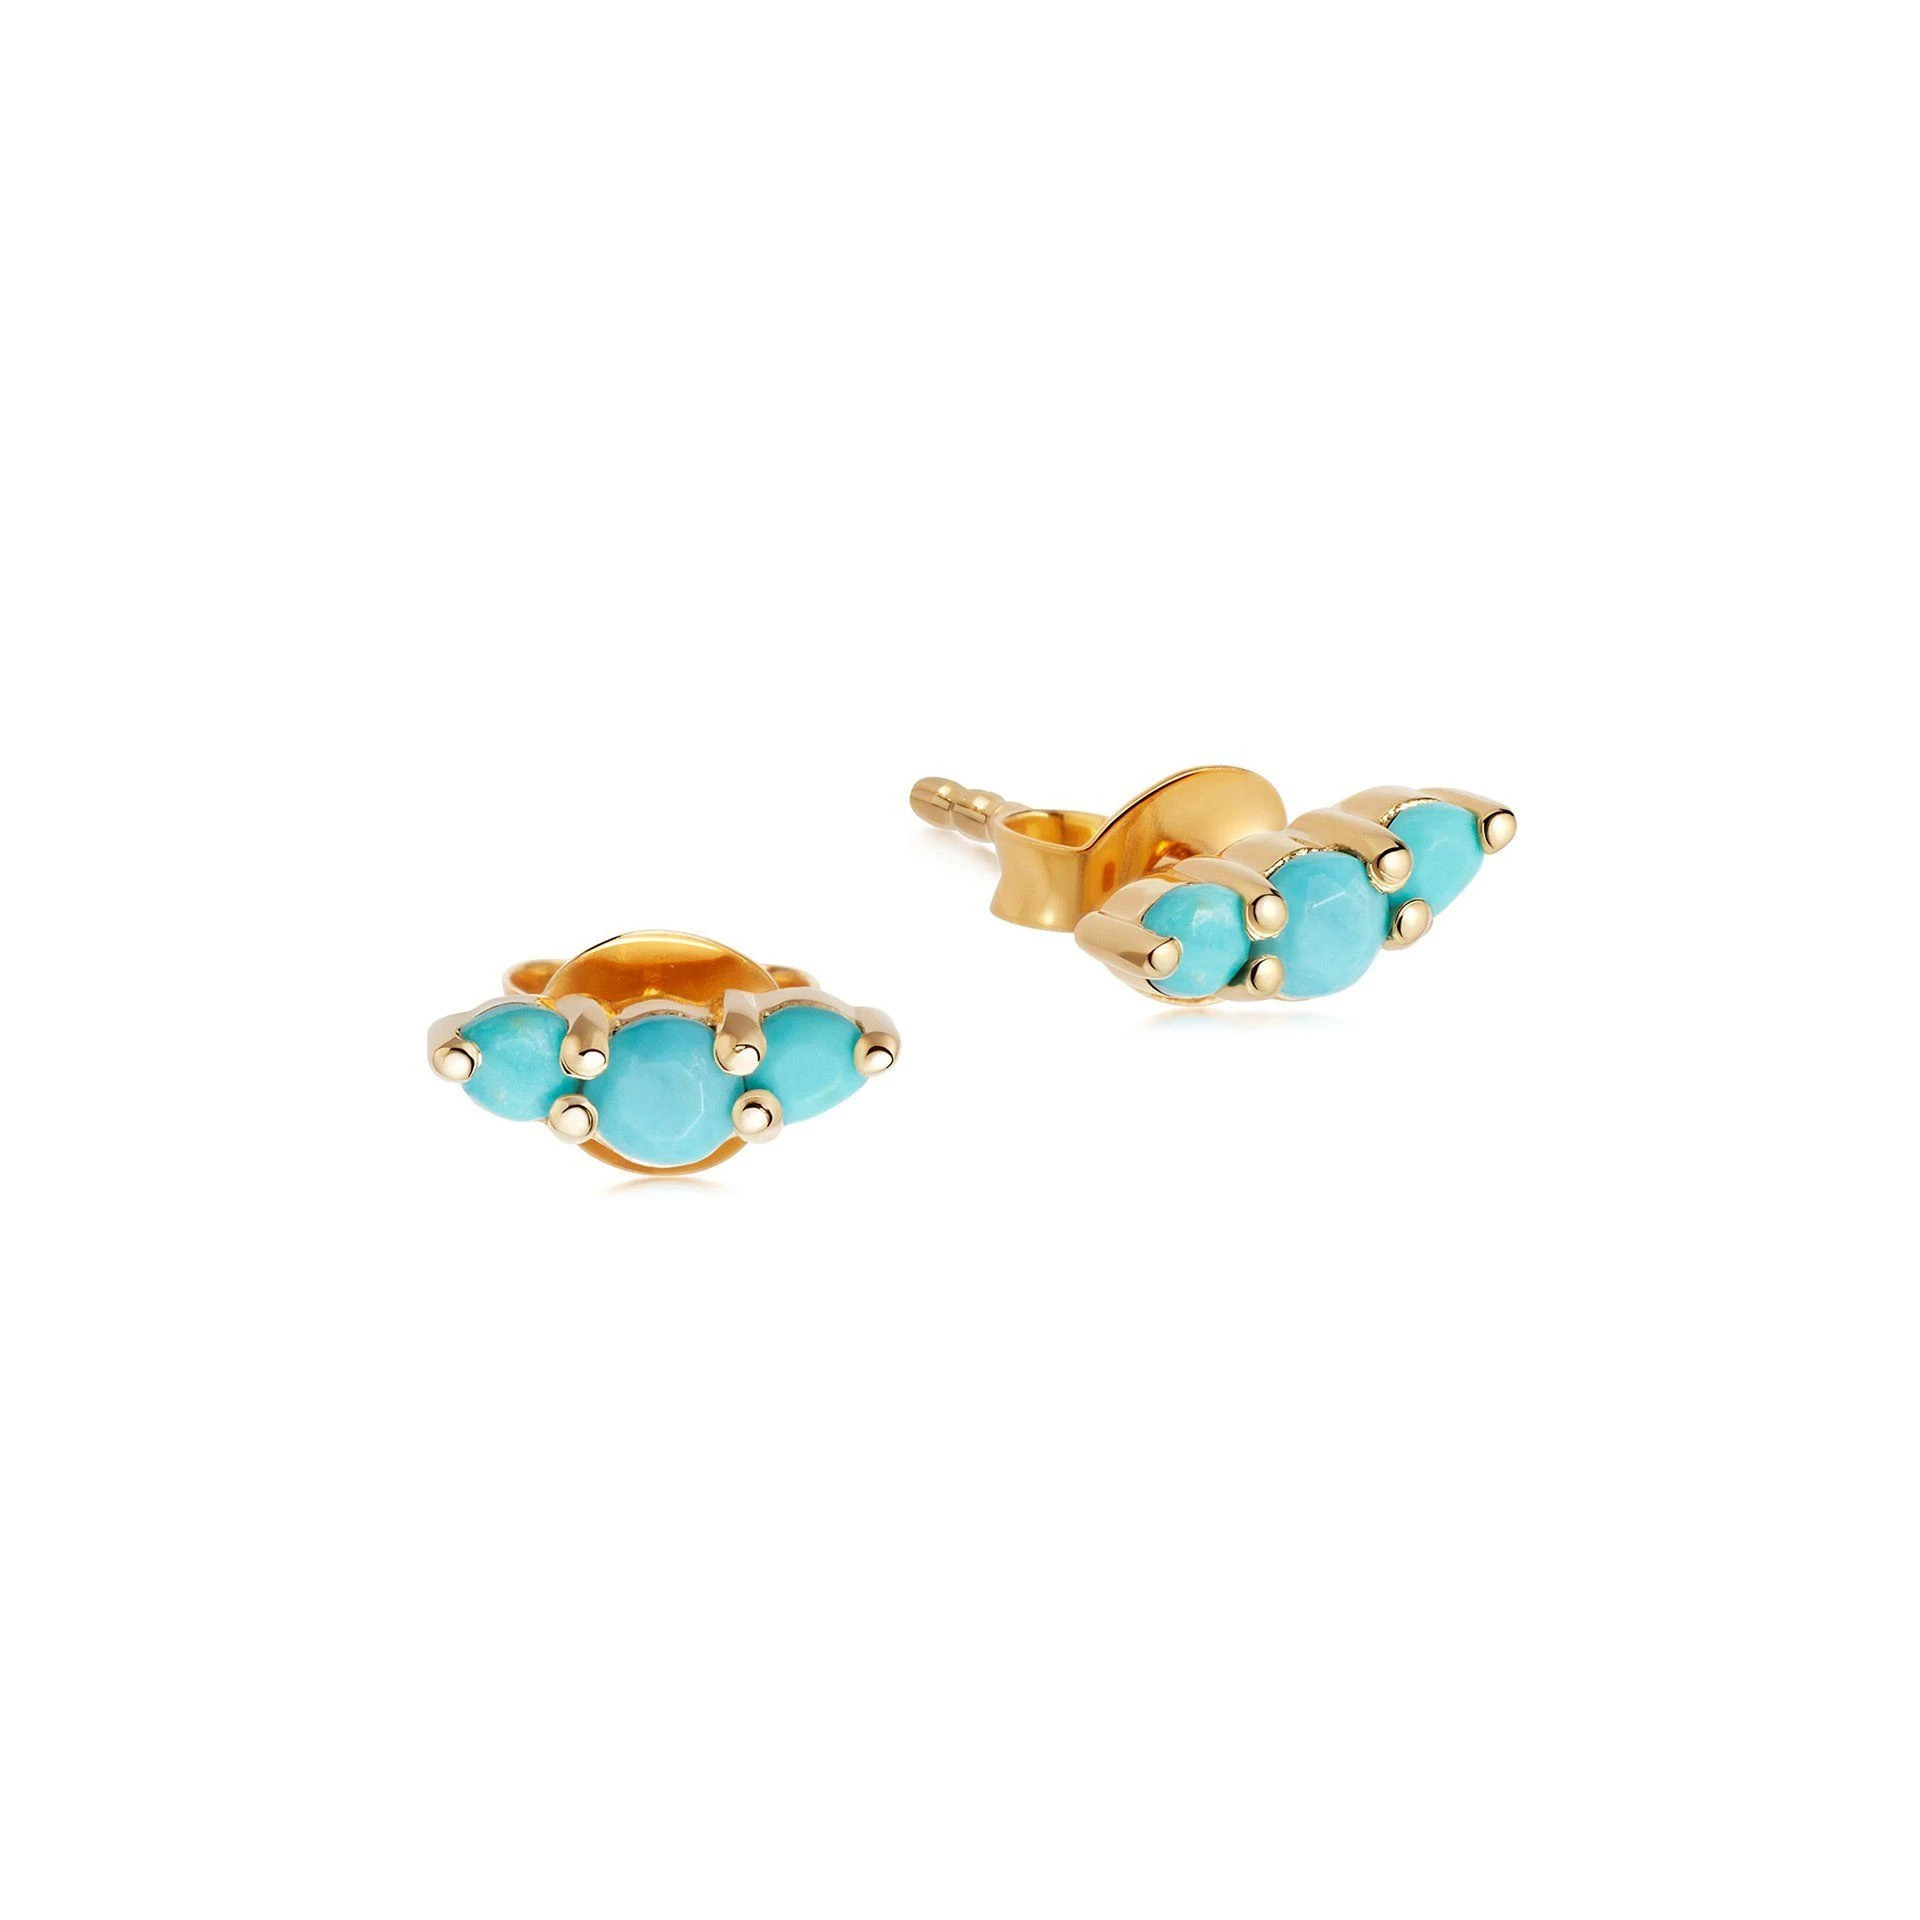 Wholesale OEM earrings studs set OEM/ODM Jewelry in 18ct gold vermeil on silver with turquoise magnesite stones